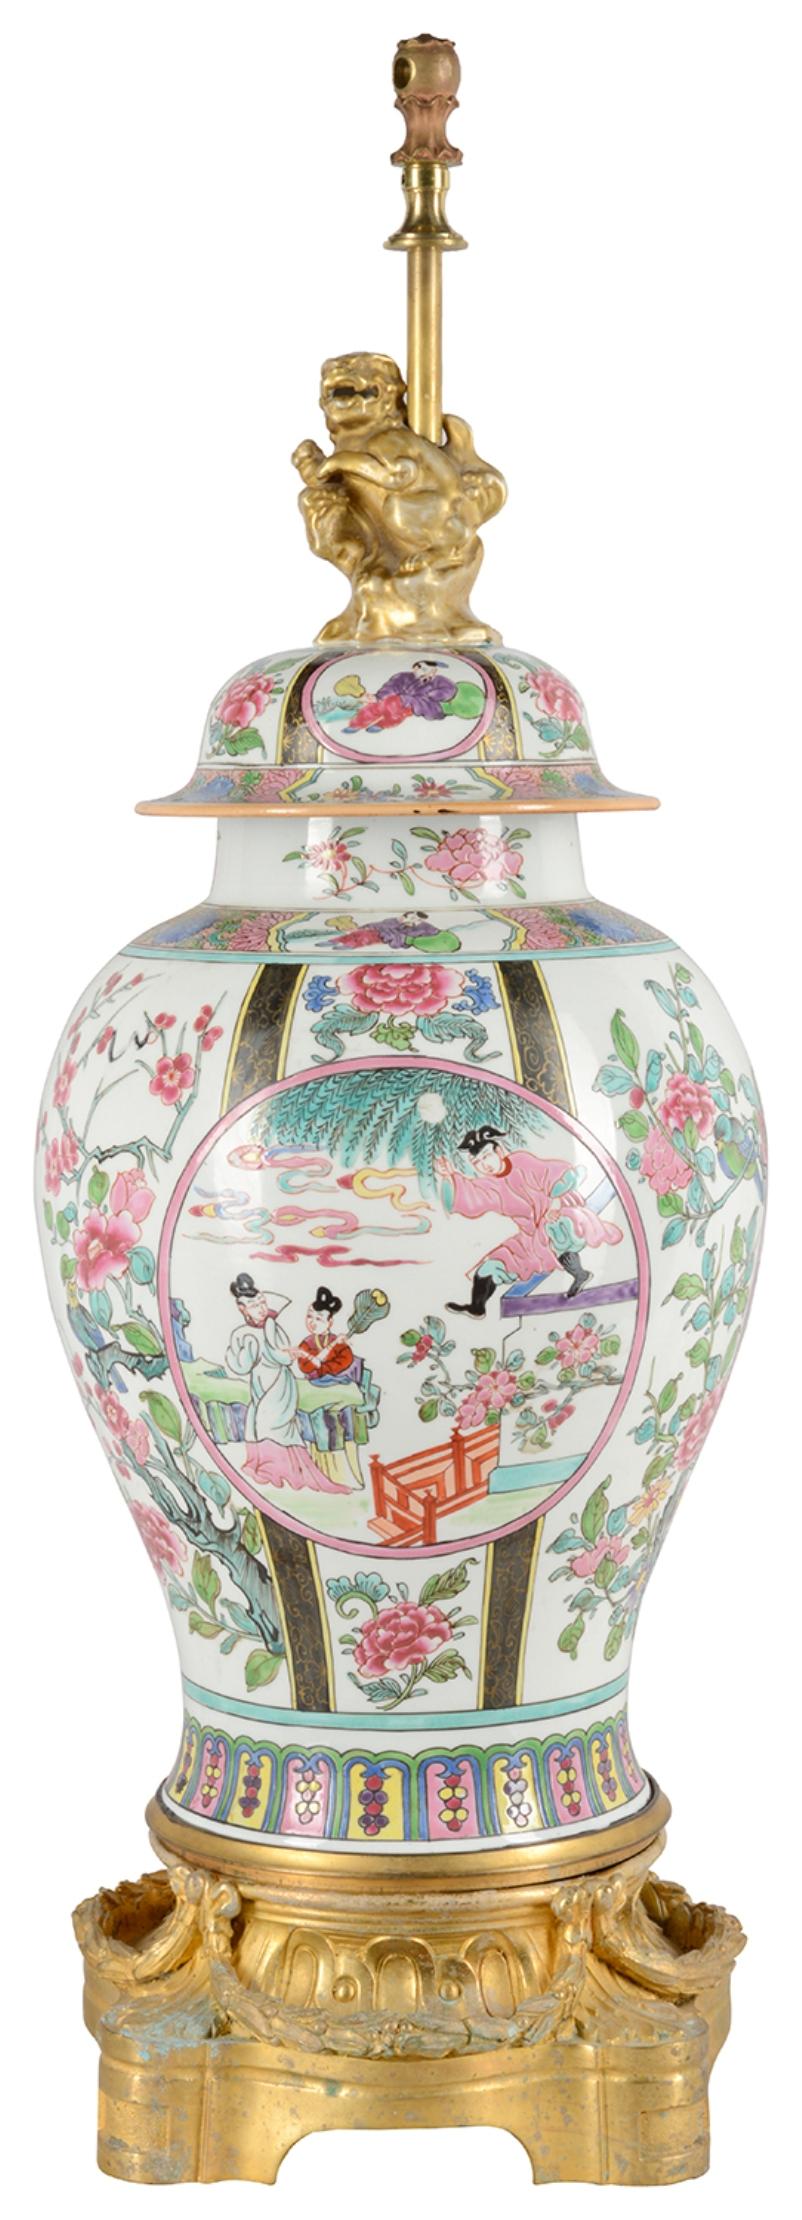 A very good quality late 19th century Famille rose style Samson porcelain lidded vase / lamp. Having classical oriental scenes with flowers, folate and motif decoration, inset painted panels of figures, gilded dog of faux finial, mounted on a